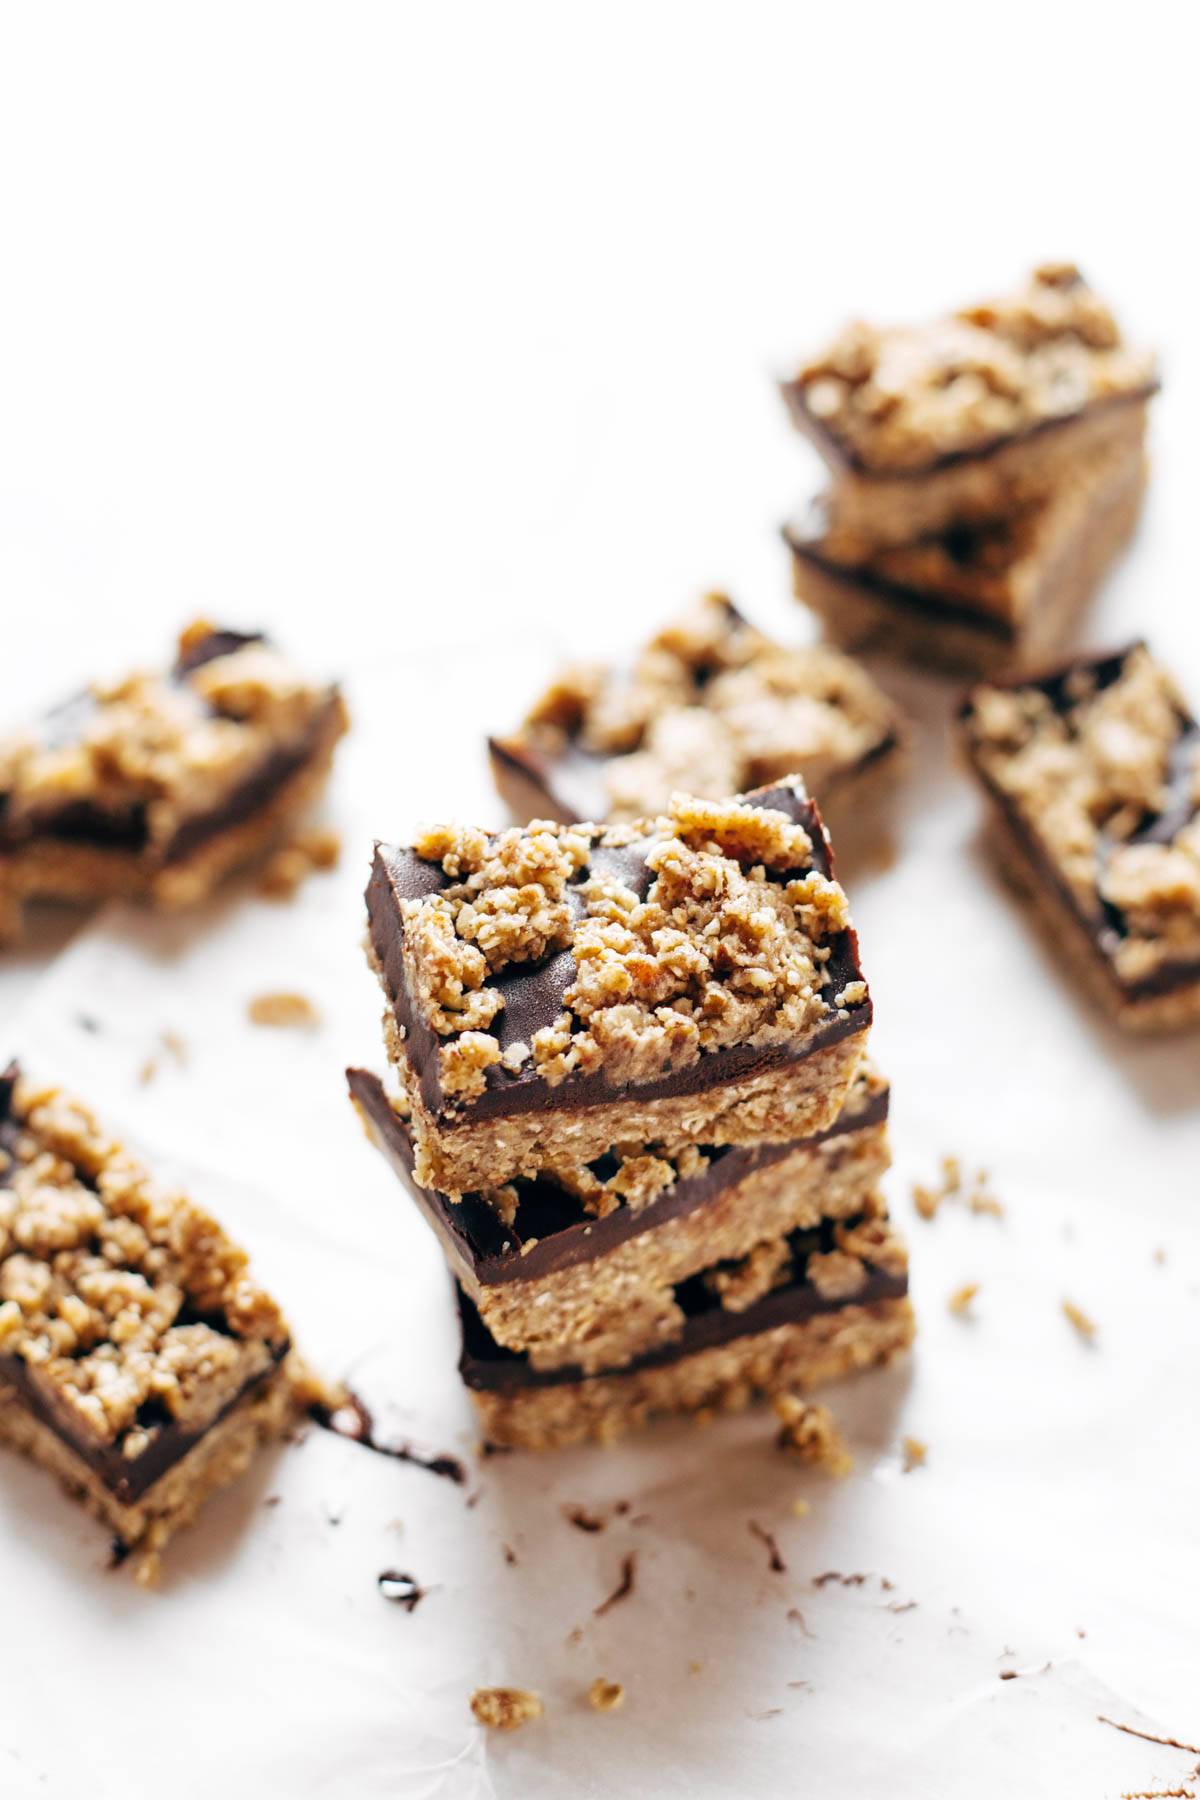 Raw Salted Chocolate Snack Bars - simple no-bake bars with clean ingredients like pecans, oats, dates, coconut oil, and cocoa powder. Super healthy dessert or snack! | pinchofyum.com